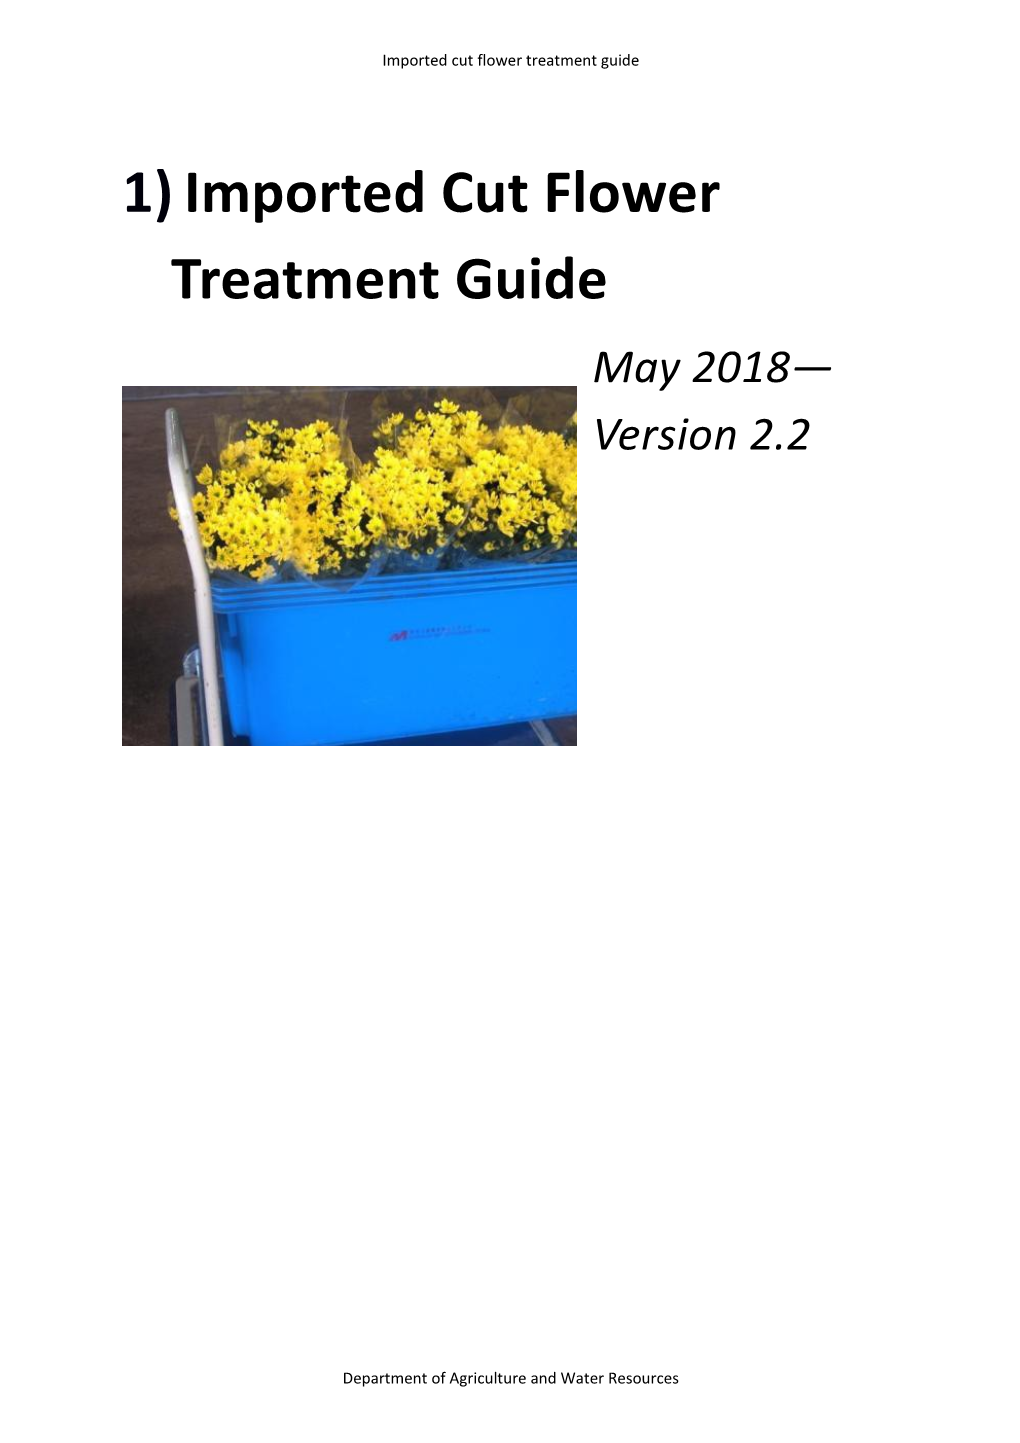 Imported Cut Flower Treatment Guide